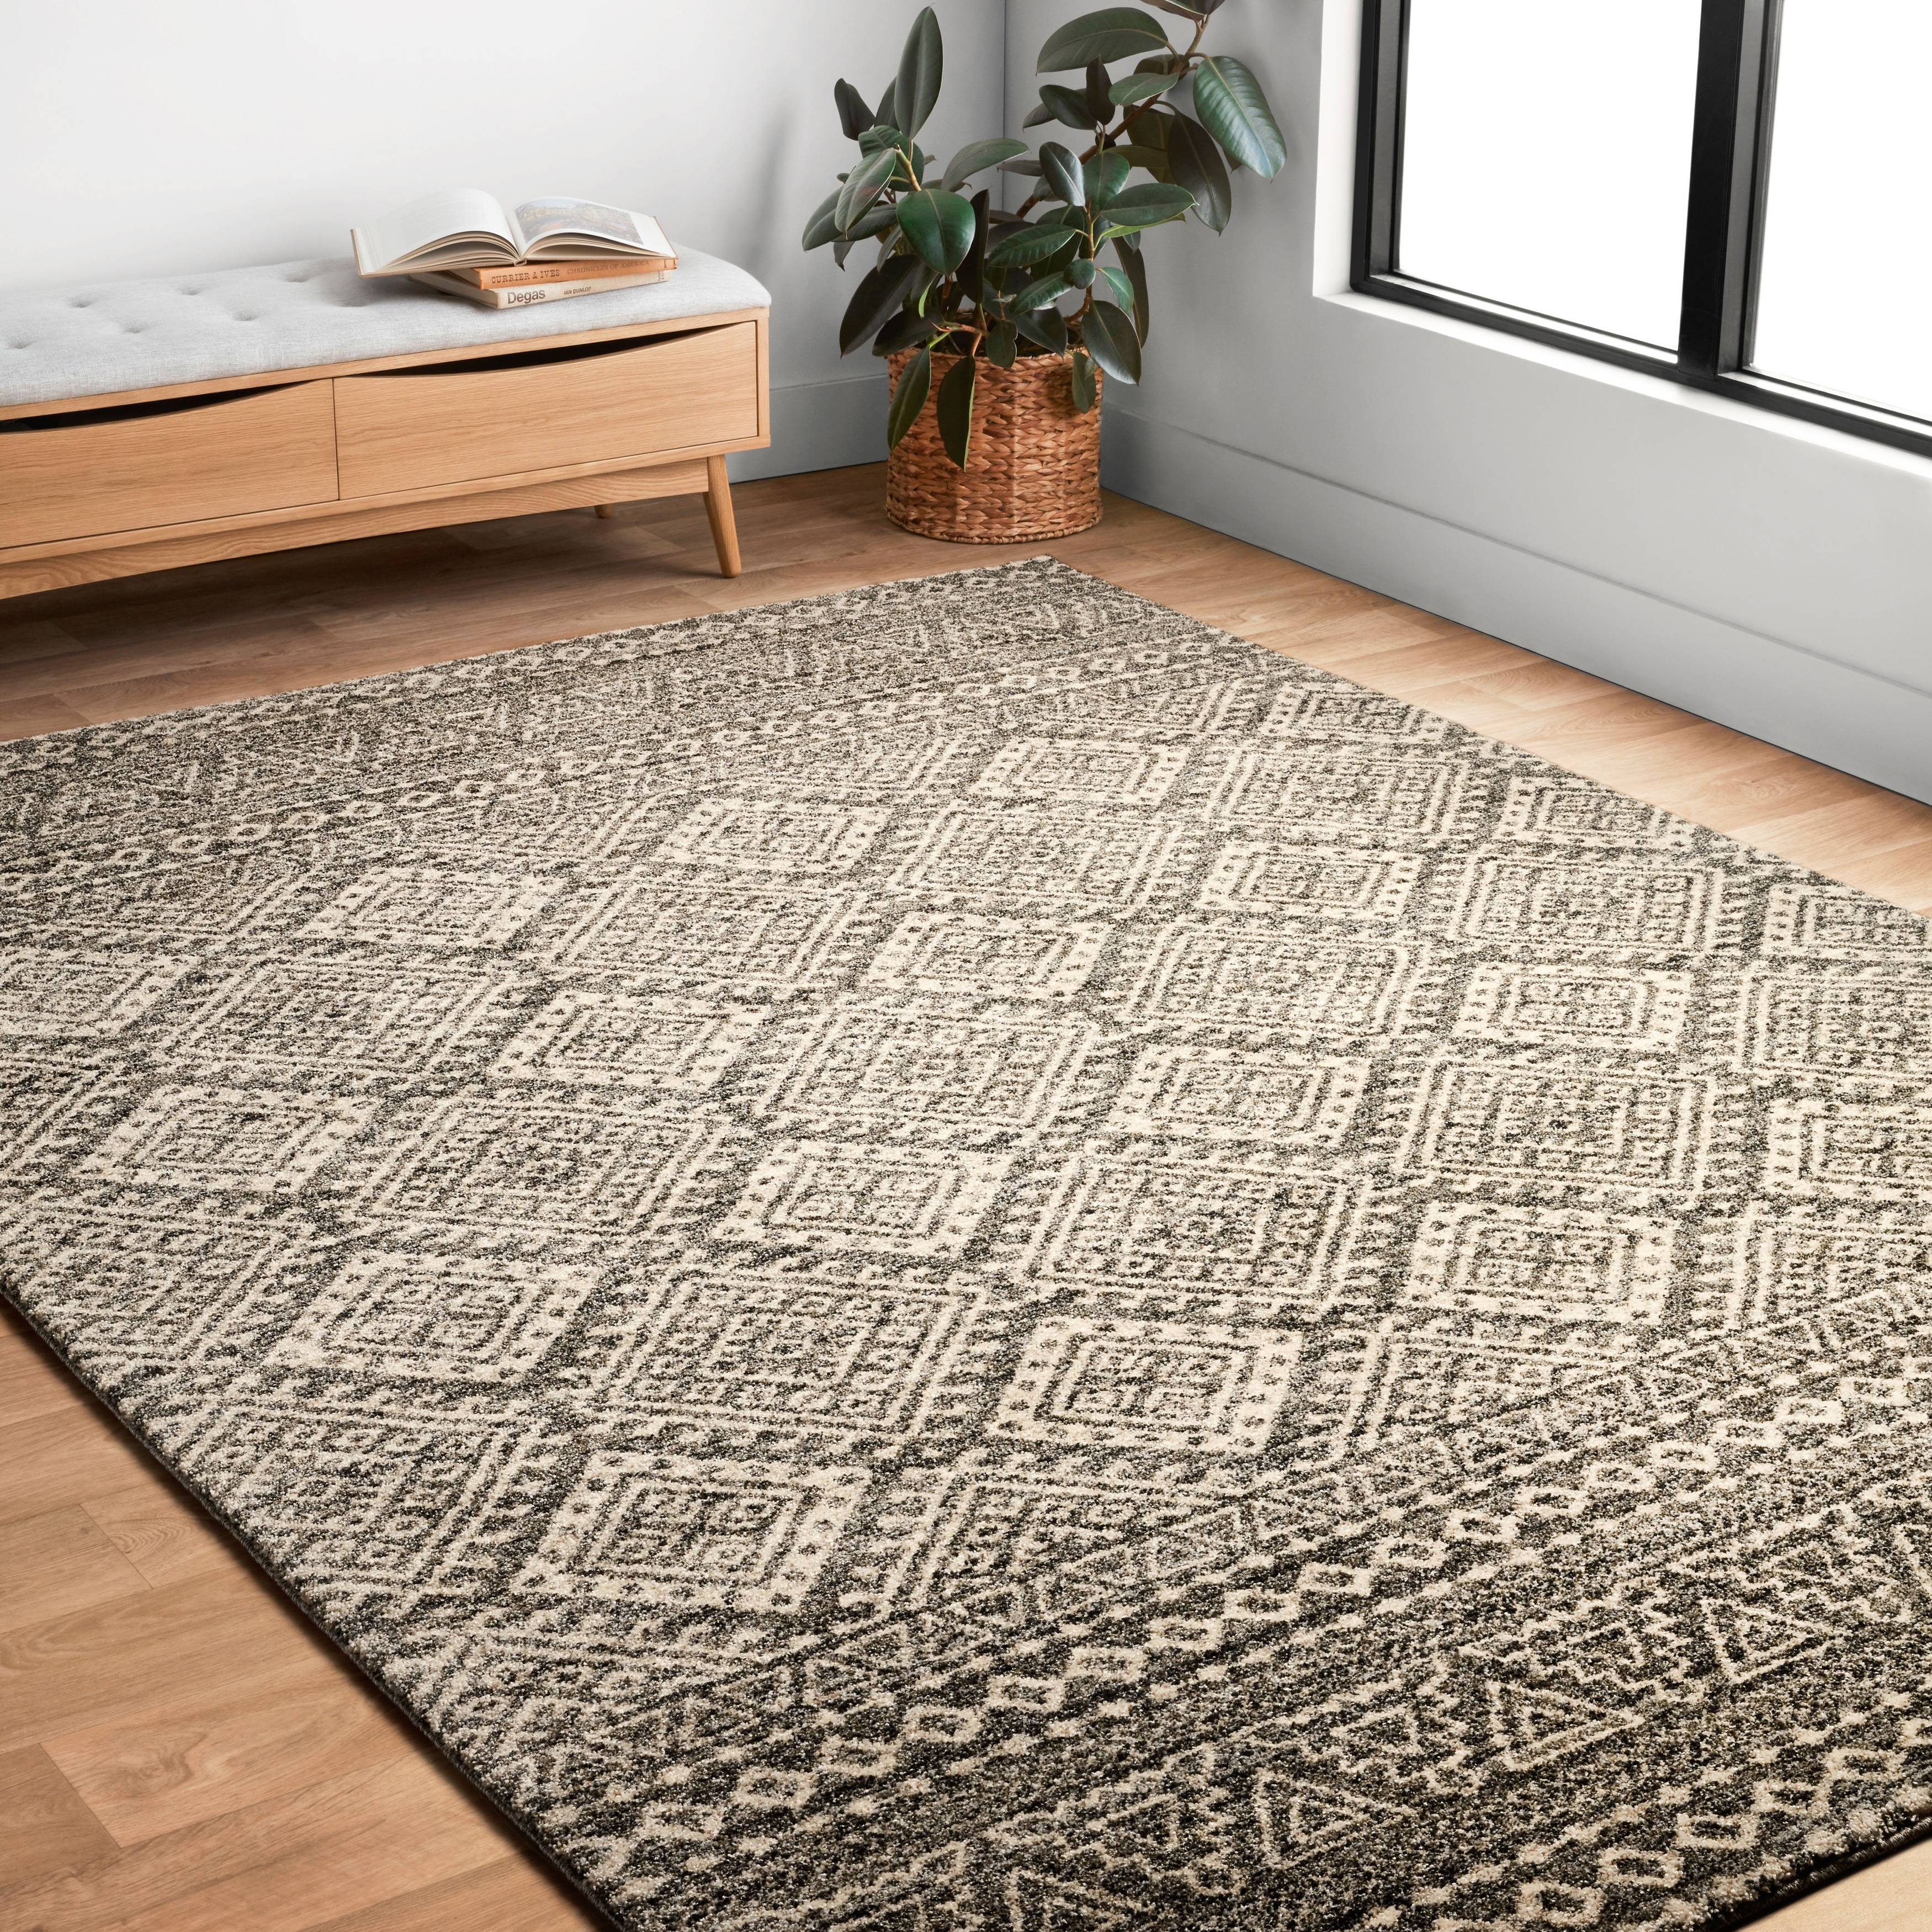 https://ak1.ostkcdn.com/images/products/is/images/direct/b946dd8c3b191d1aeef6b683eee1a0236074c26e/Alexander-Home-Brently-Graphite--Ivory-Moroccan-Geometric-Rug.jpg